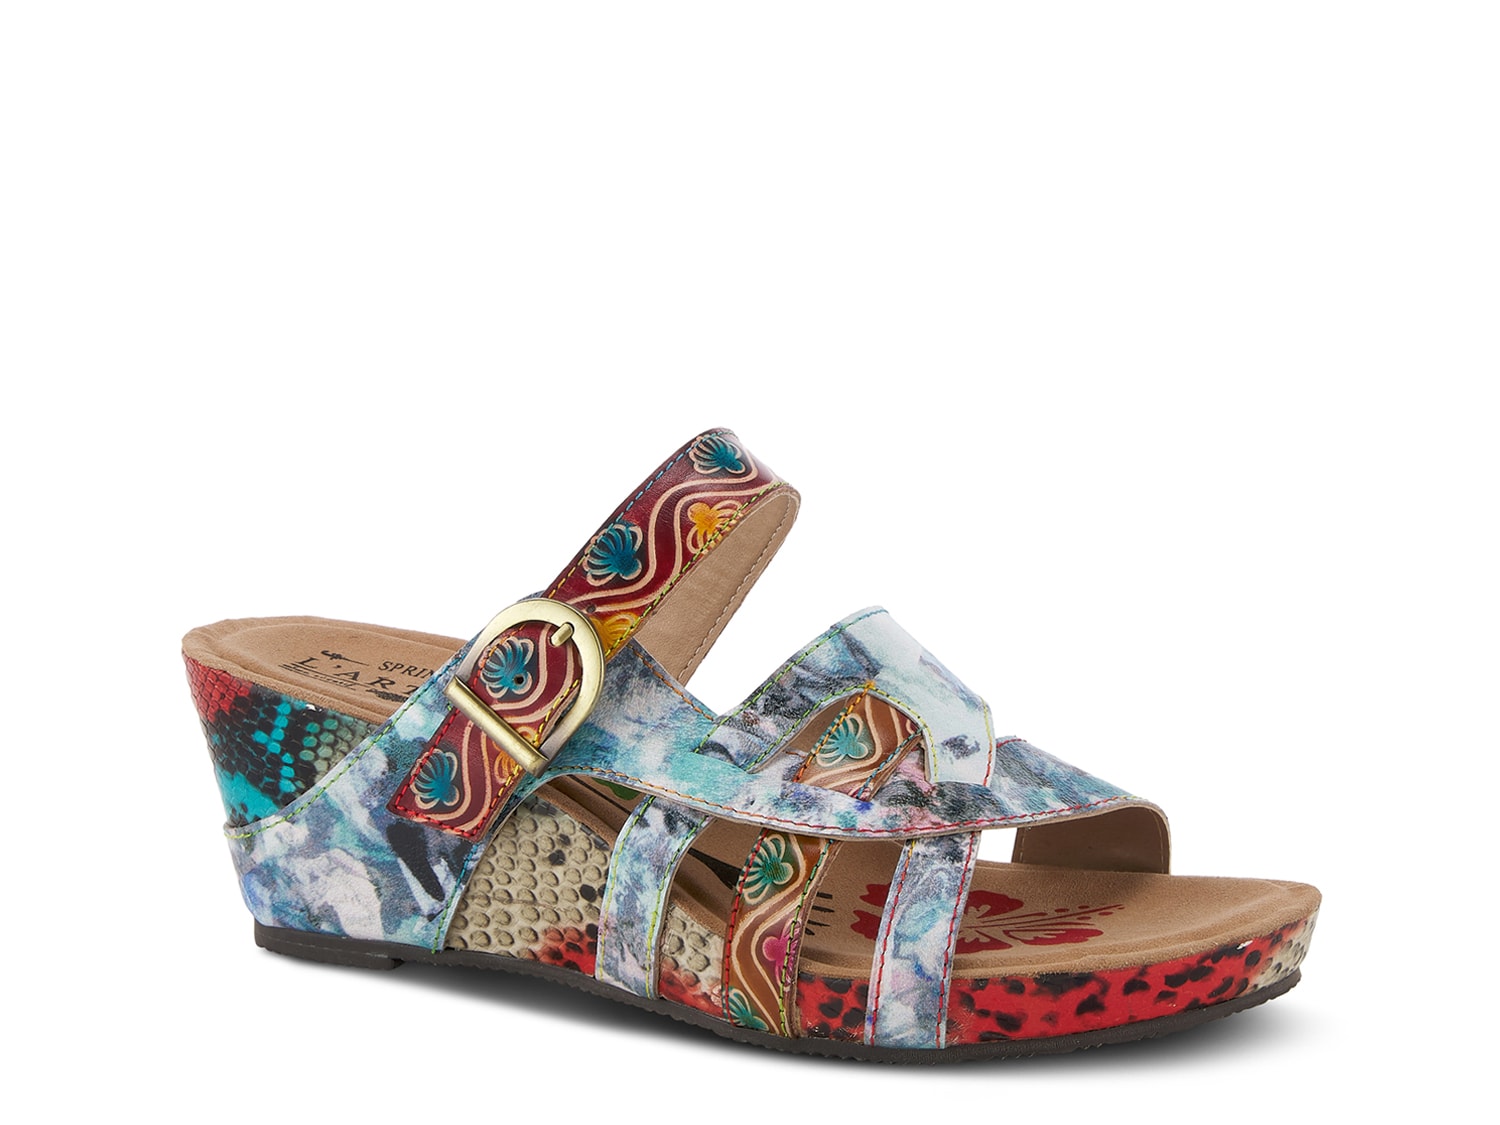 L'Artiste by Spring Step Baocire Wedge sandal - Free Shipping | DSW